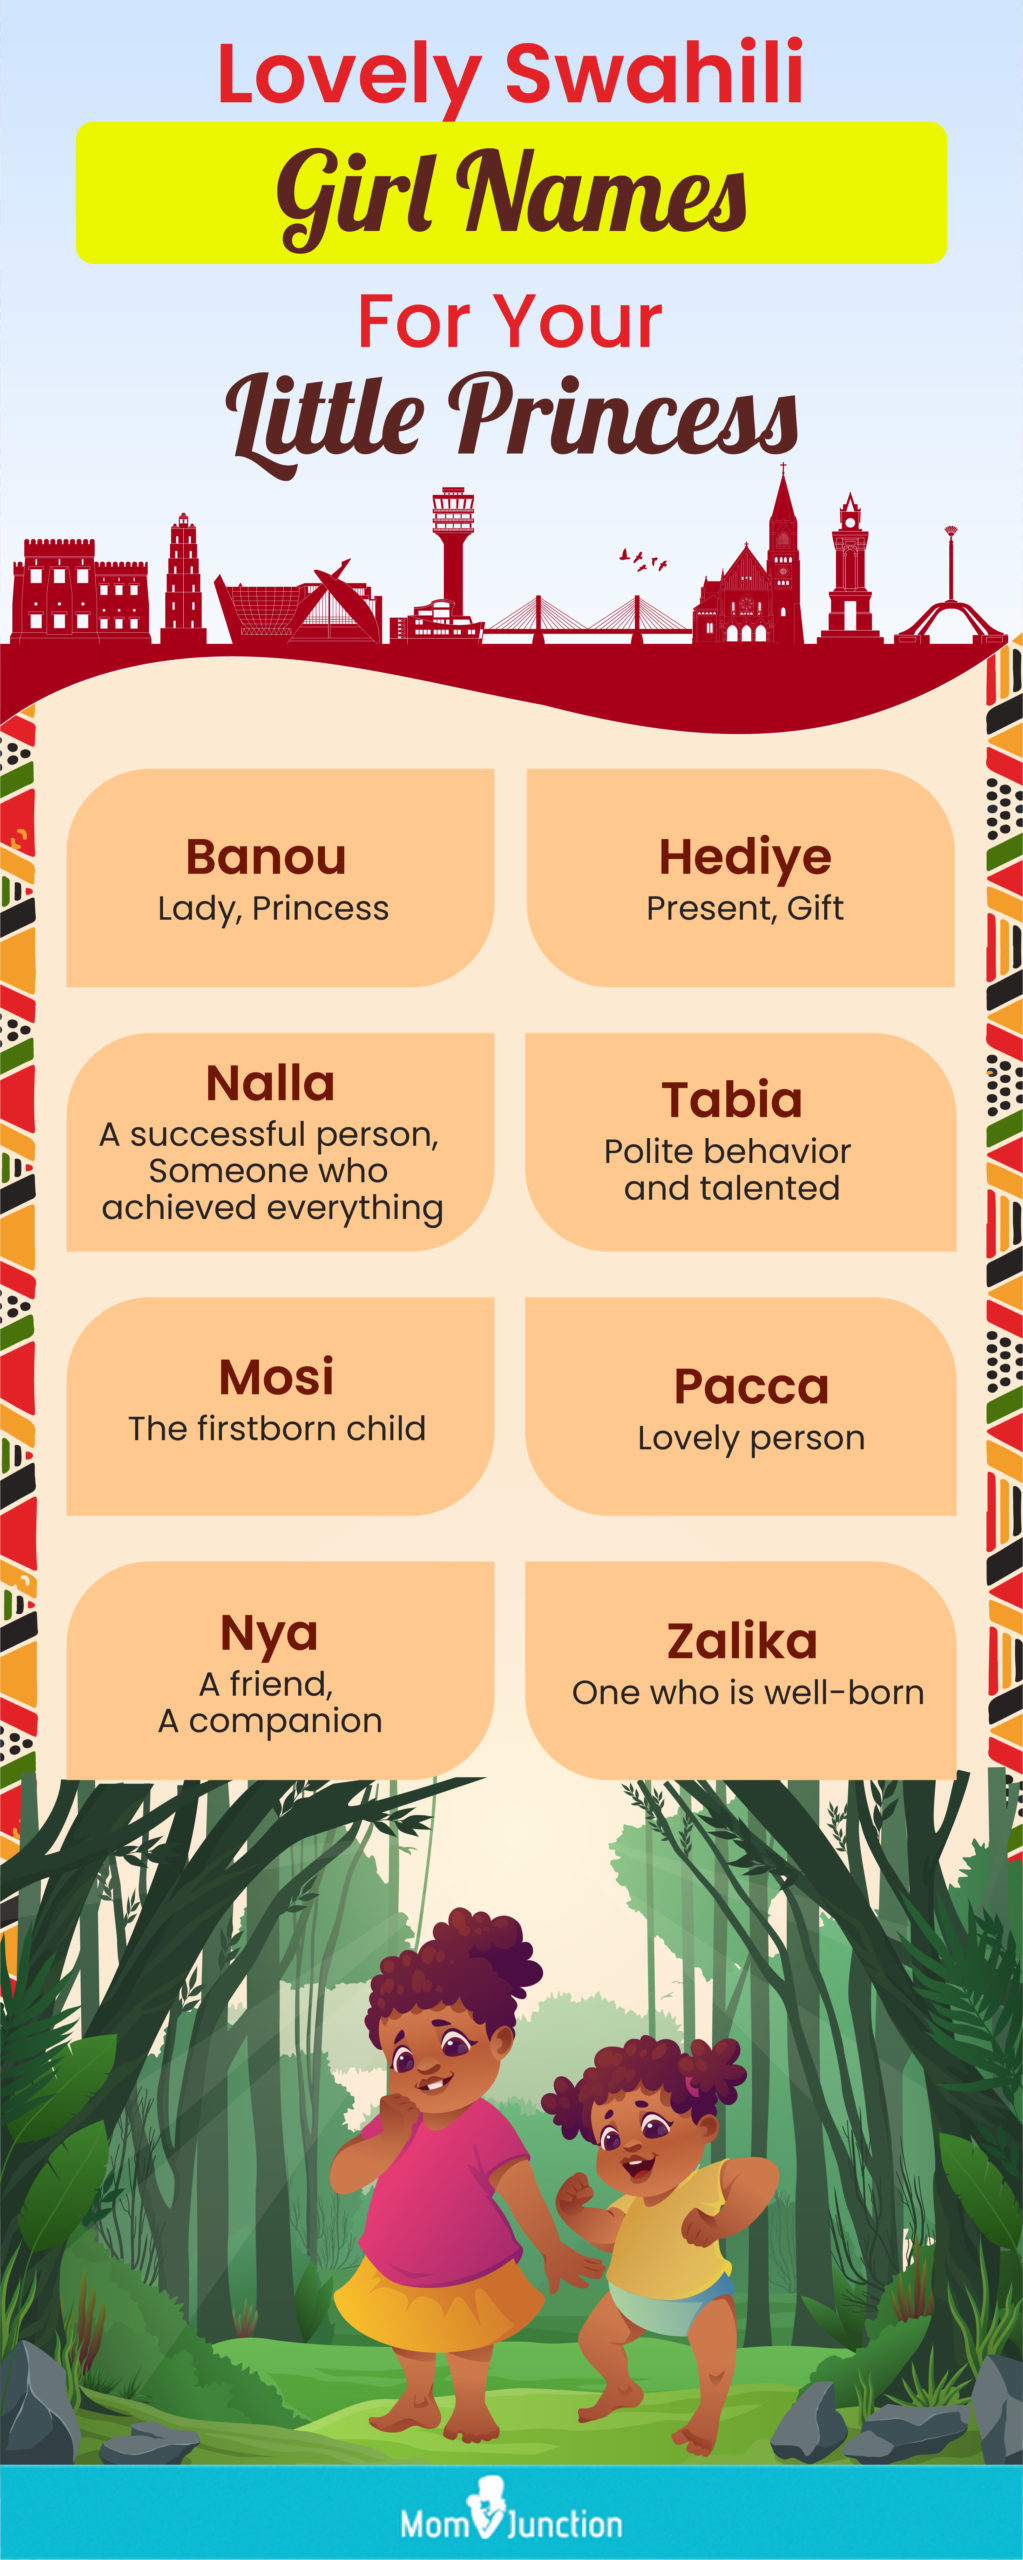 lovely swahili girl names for your little princess (infographic)